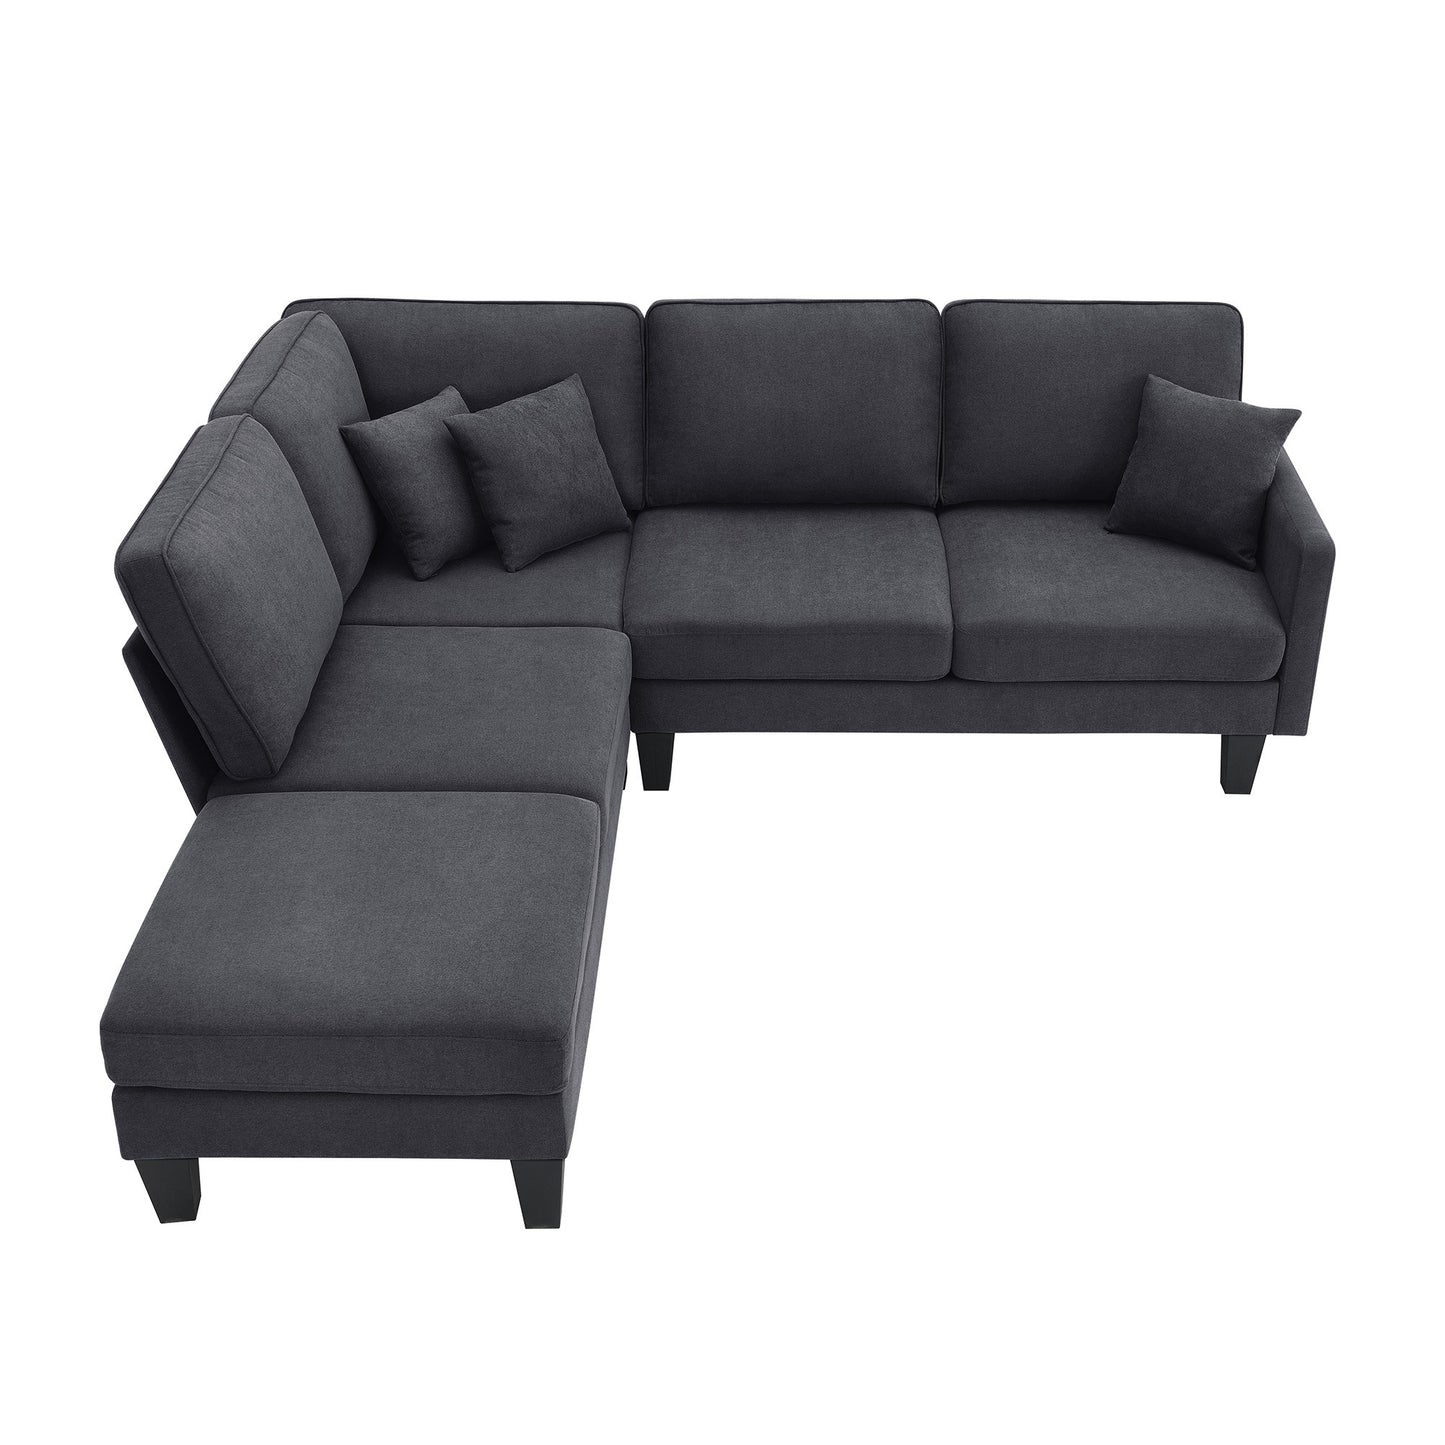 Terrycloth Sectional Sofa, 5-Seat Set, Chaise Lounge, L-Shape, Living Room, Grey